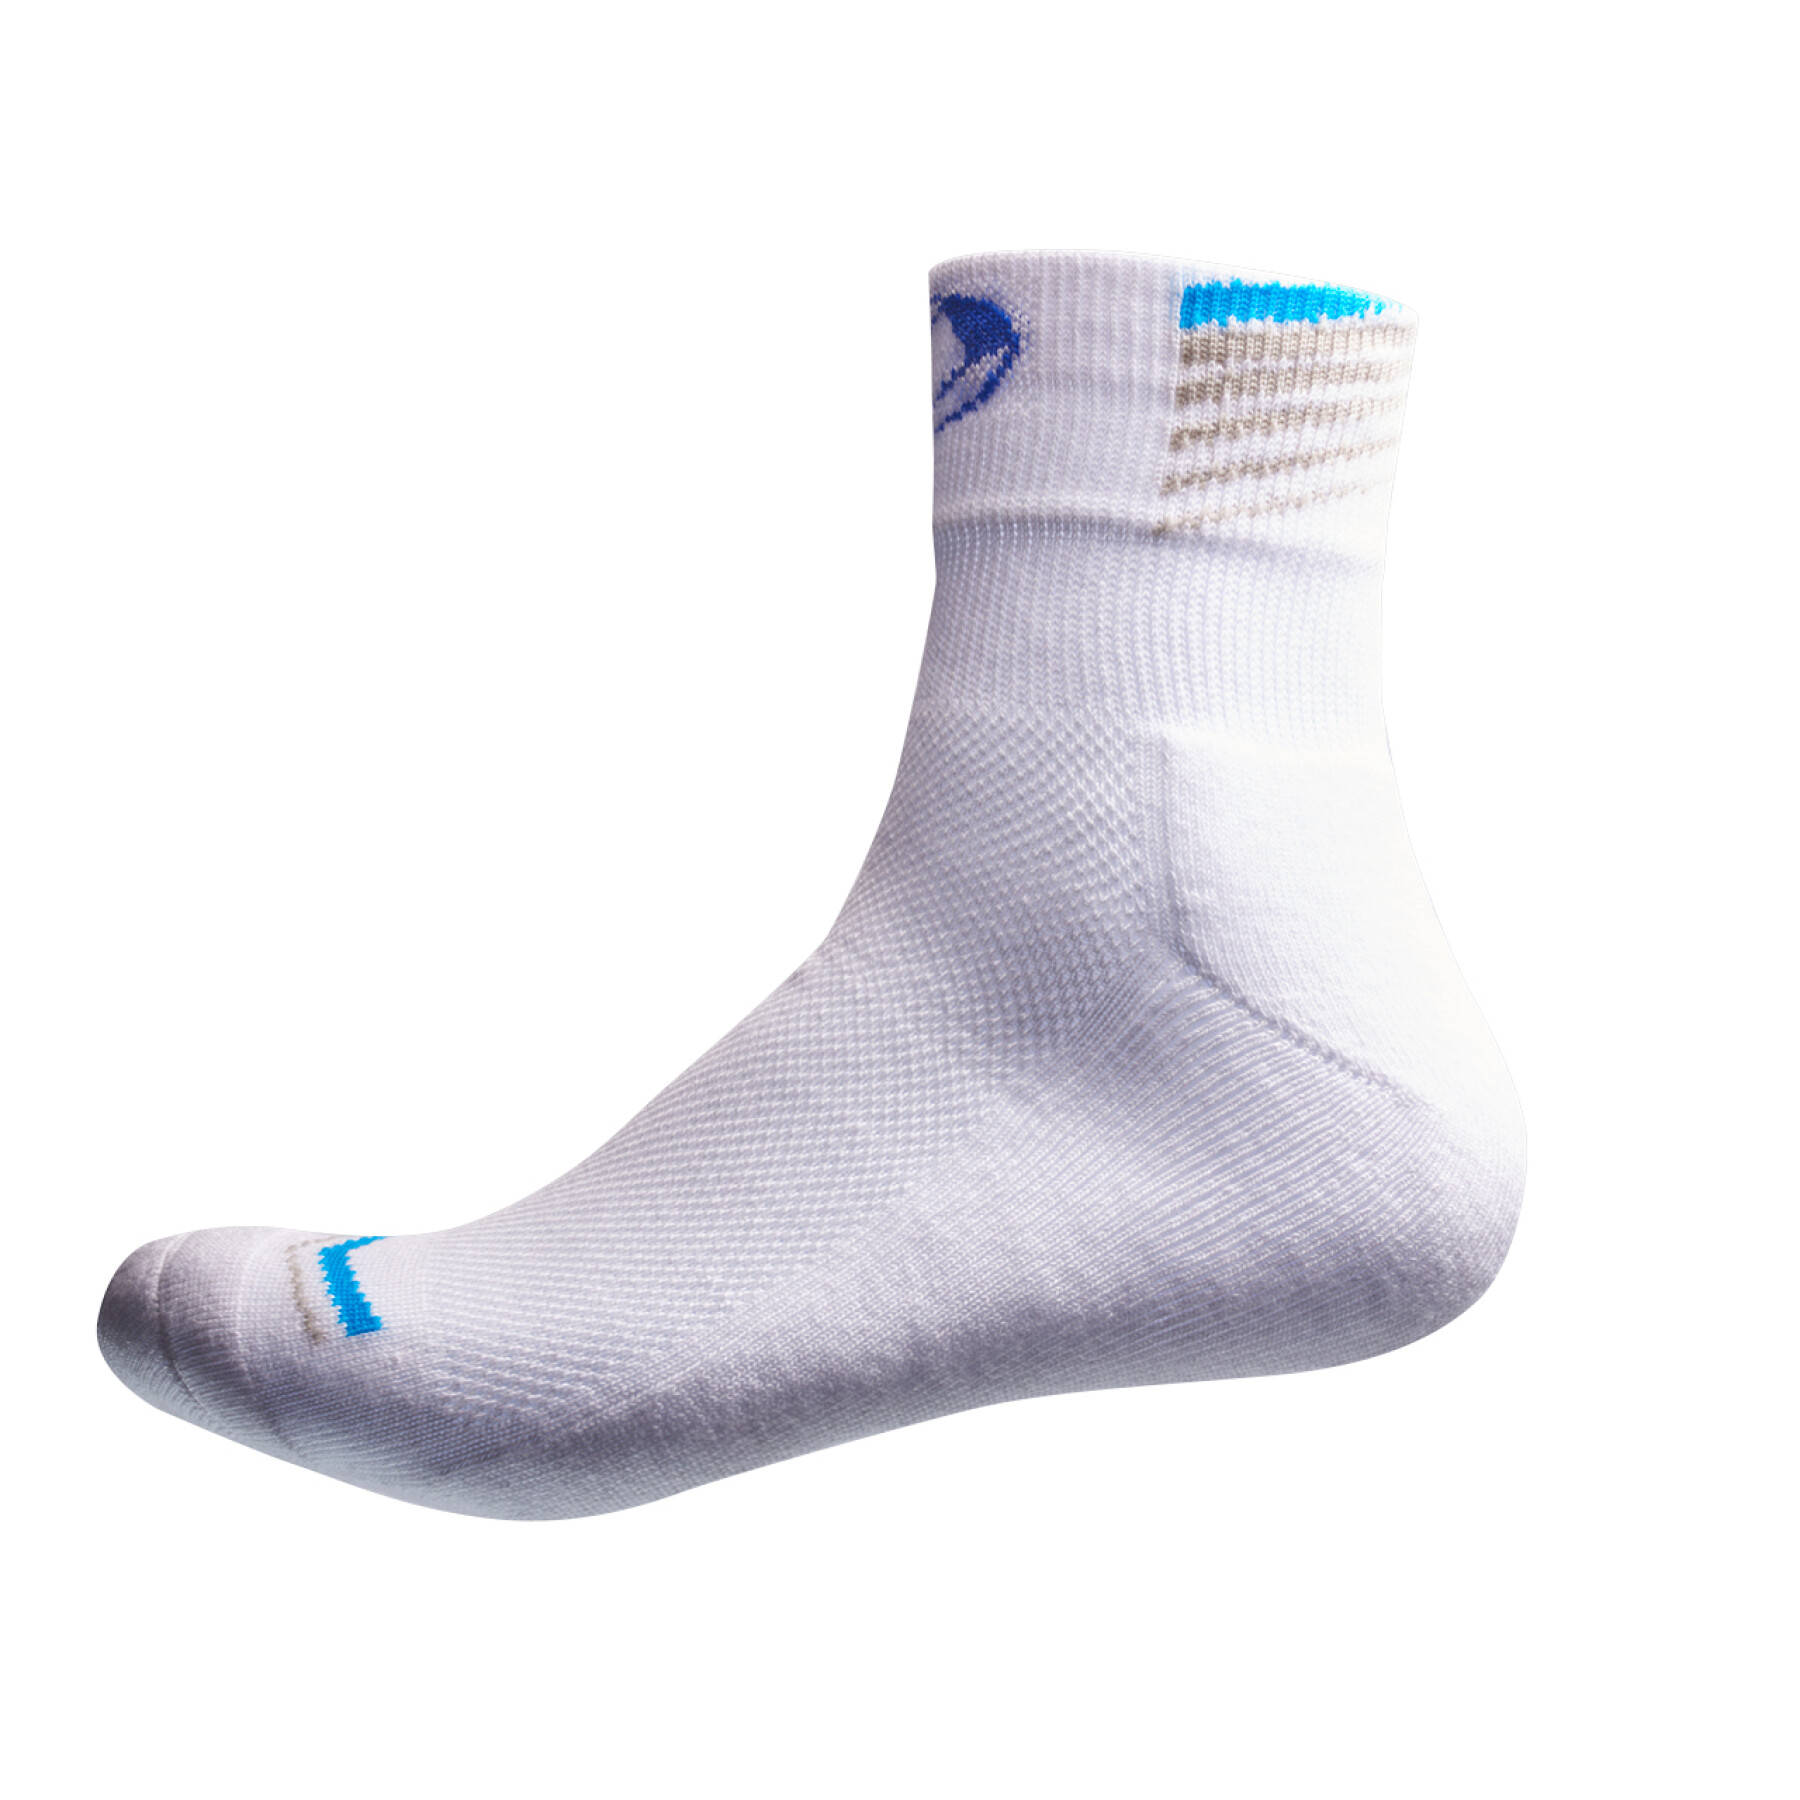 Chaussettes Donic Siena